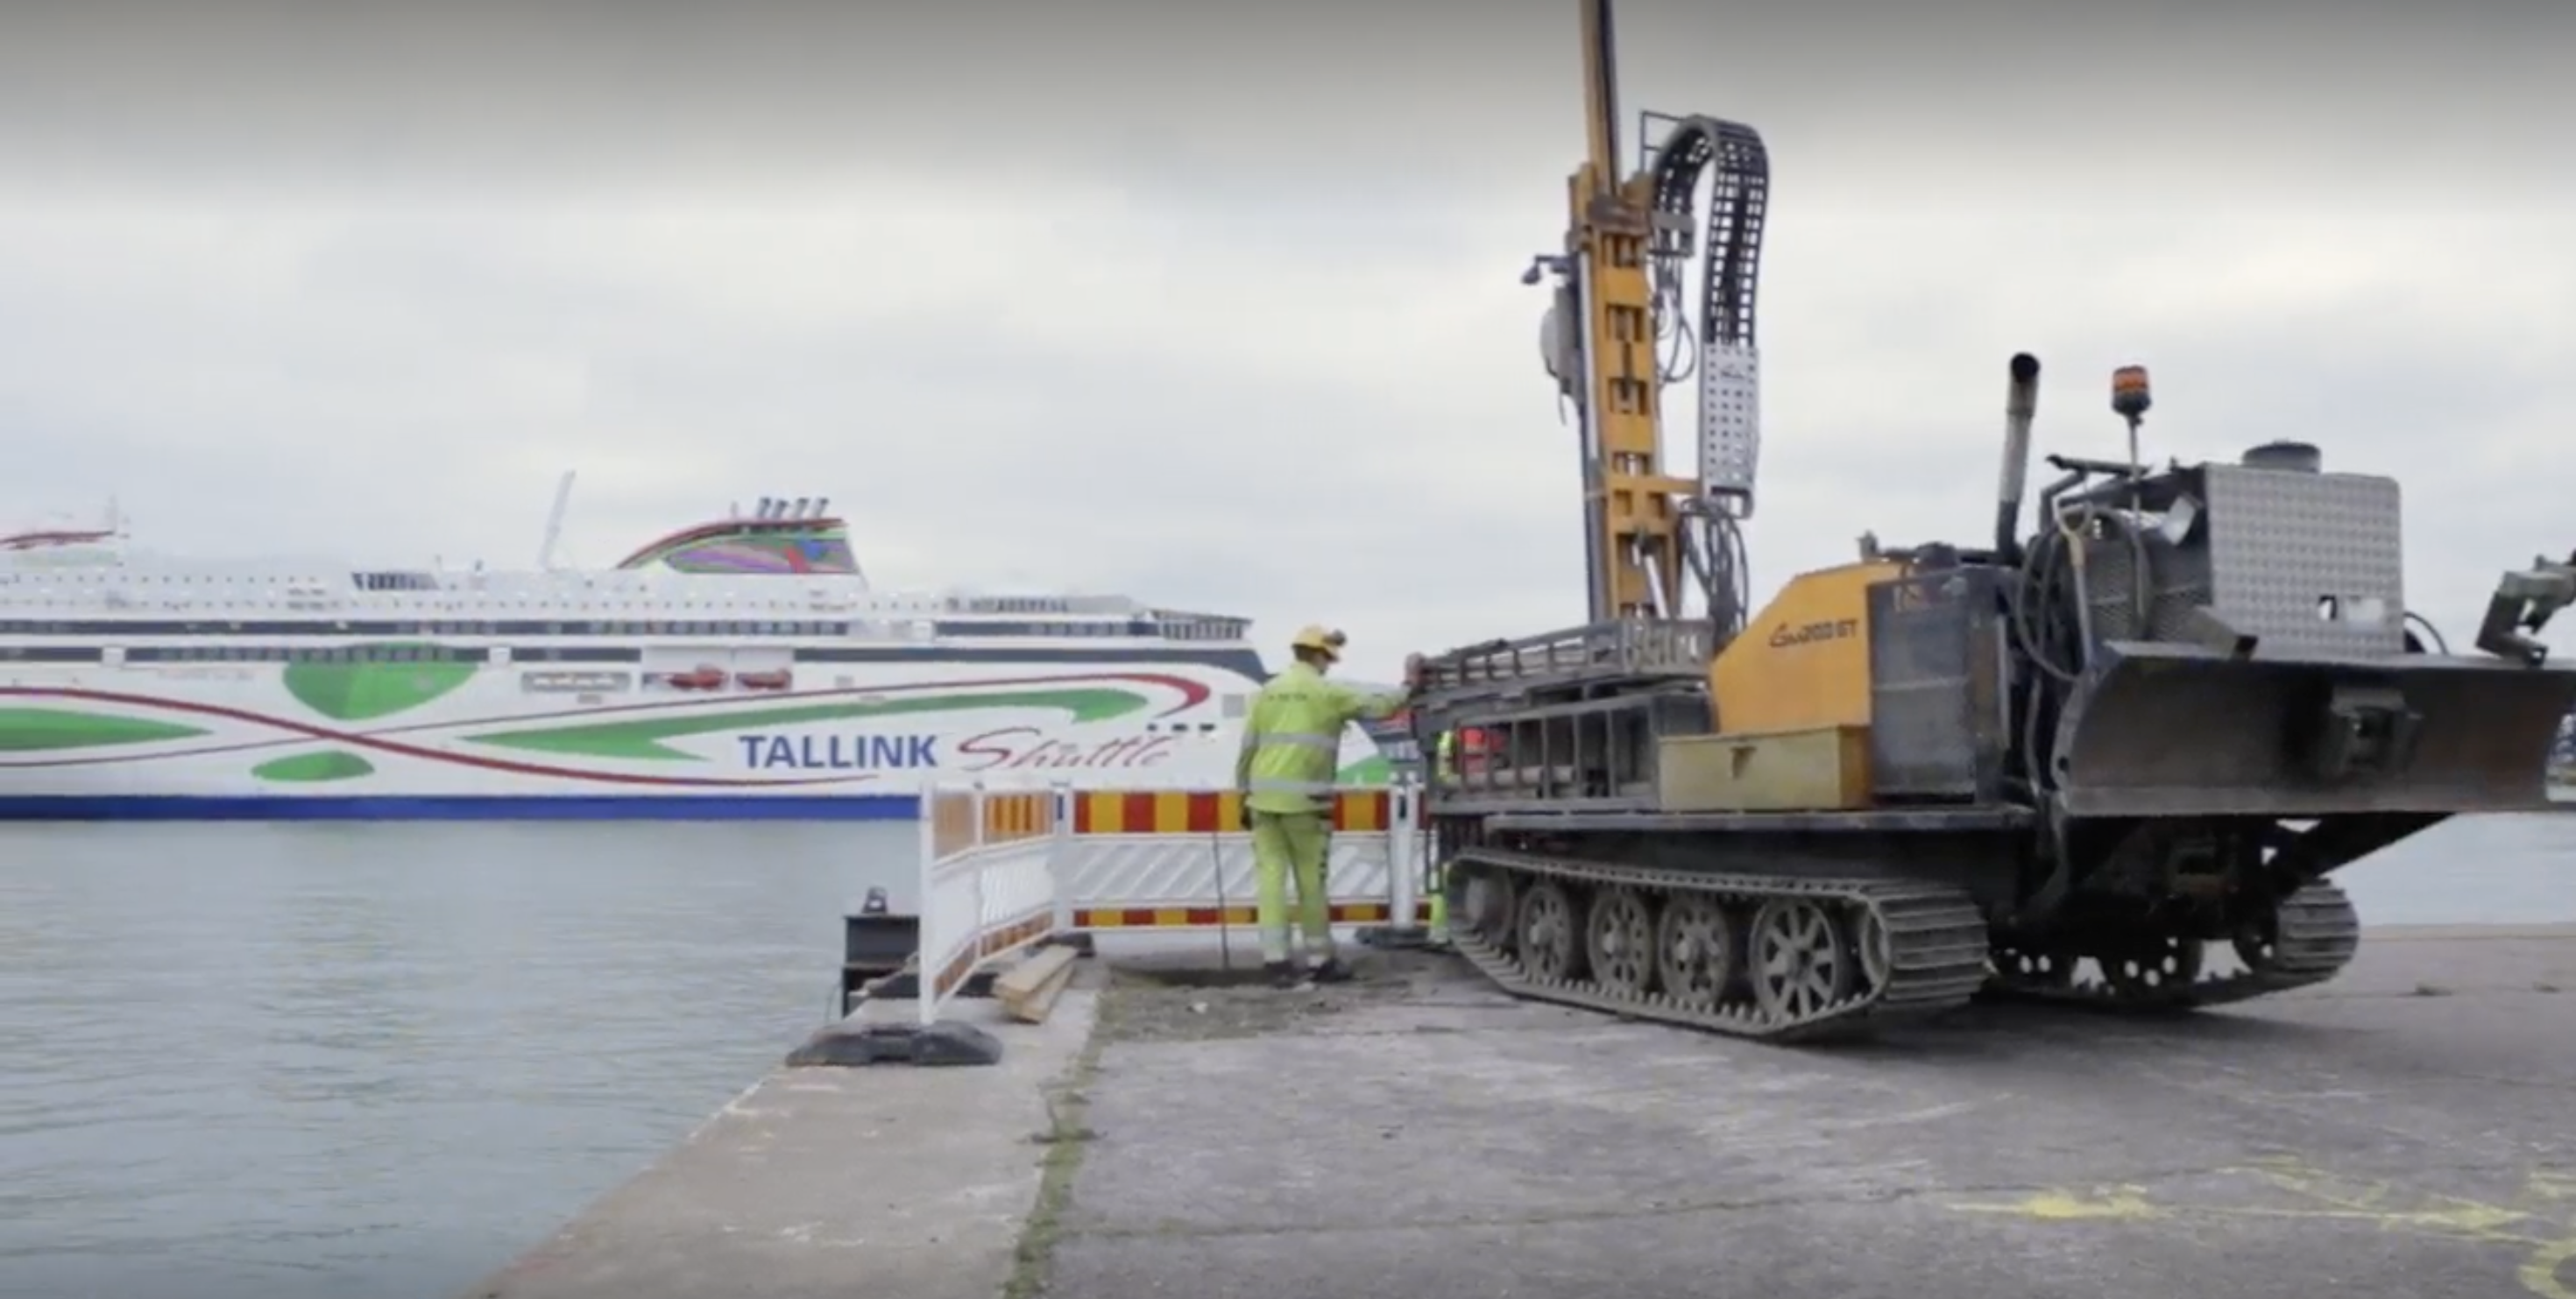 Strengthening of the pier concrete supports of port of Helsinki